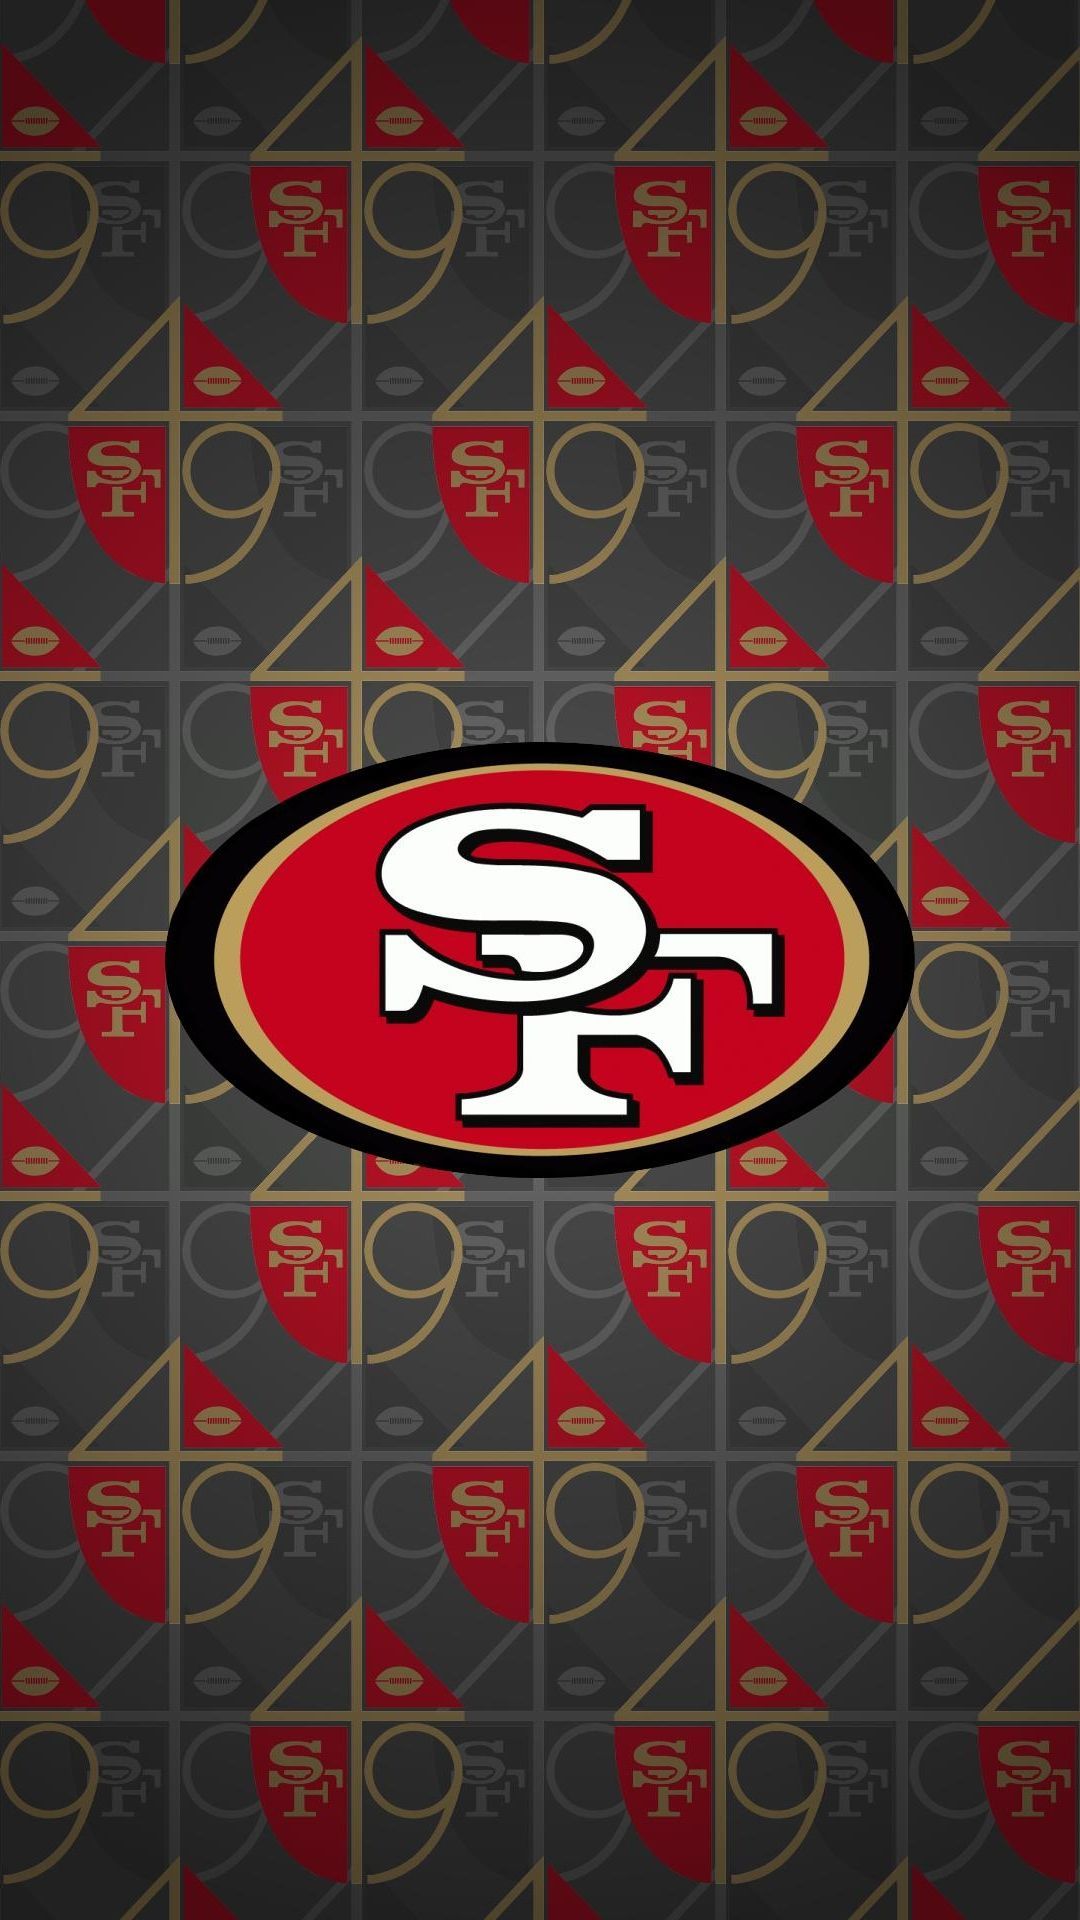 Black 49ers HD Wallpaper Android in 2020ers, San francisco 49ers football, HD wallpaper android